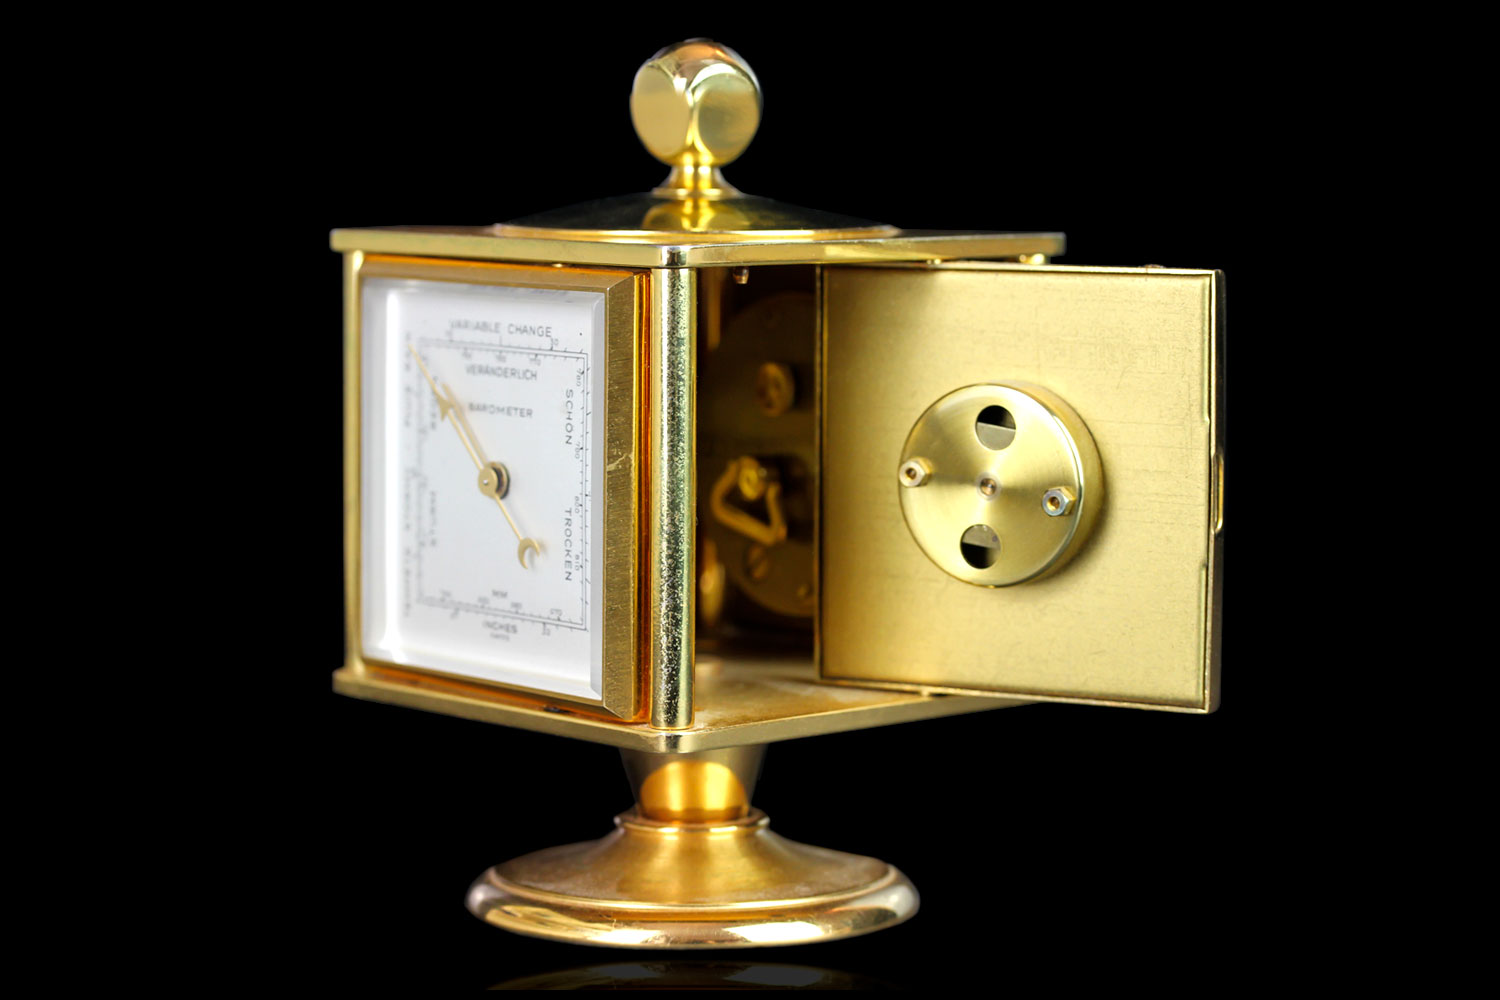 IMHOF Swiss desk clock, four sides with Time, Hygrometer, Barometer and Thermometer, gilt case - Image 7 of 7